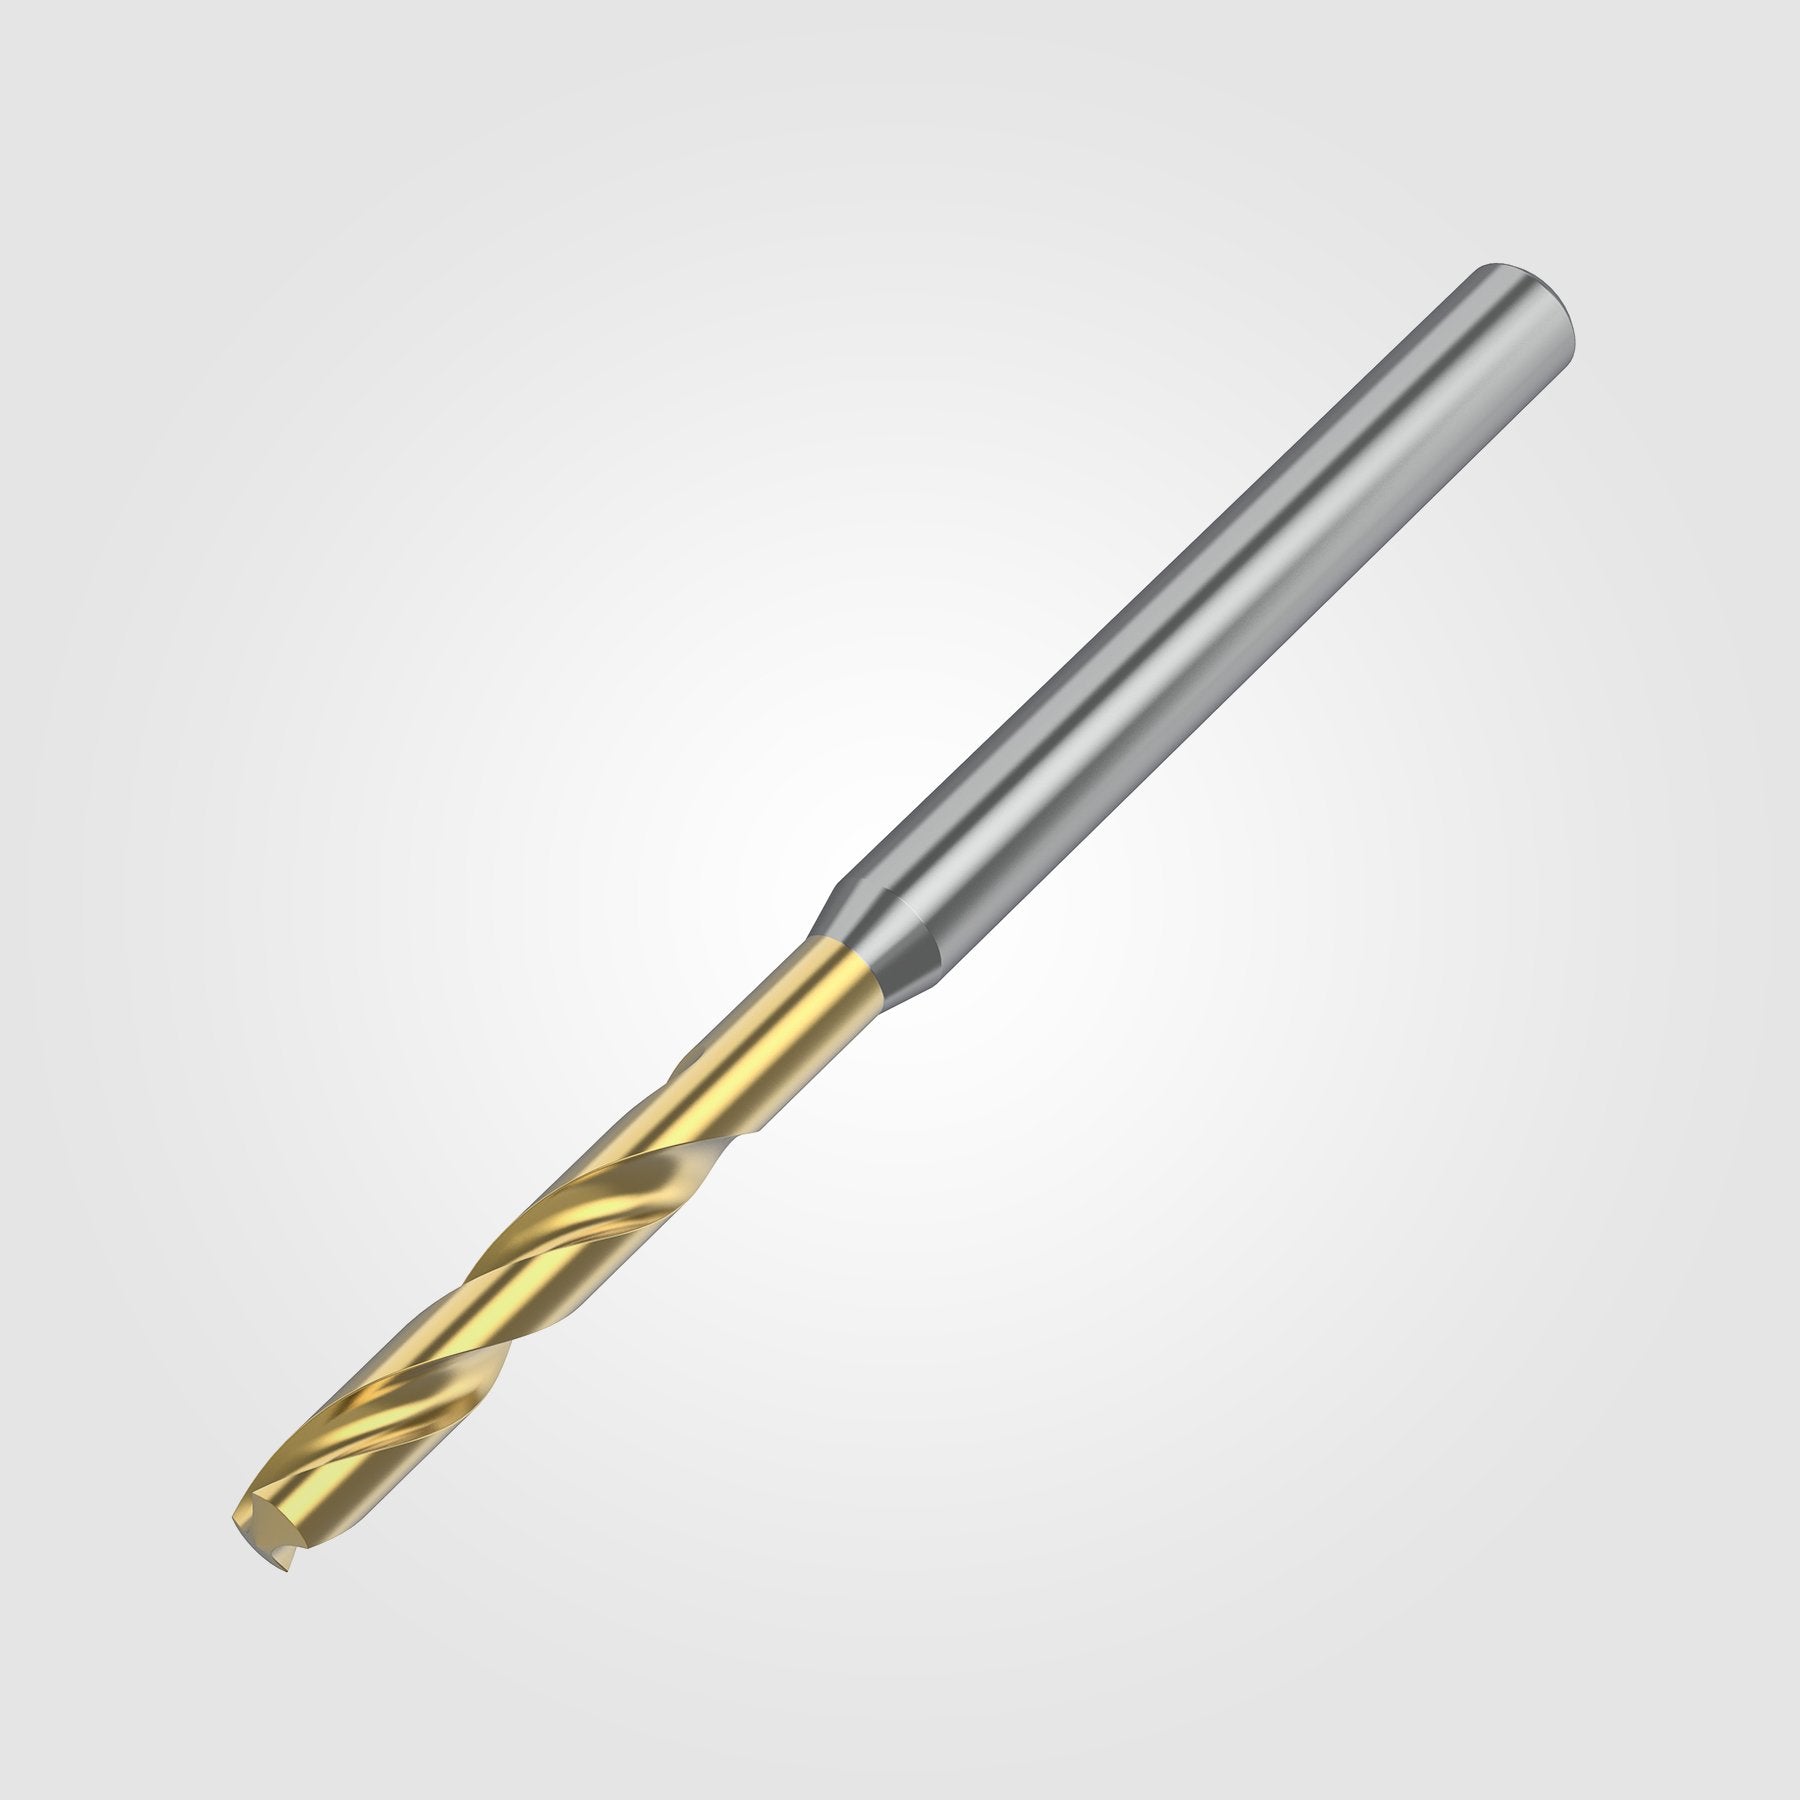 GOdrill (THROUGH COOLANT) | 13.096mm / .5156" / 3xD | SOLID CARBIDE DRILL | 4151241